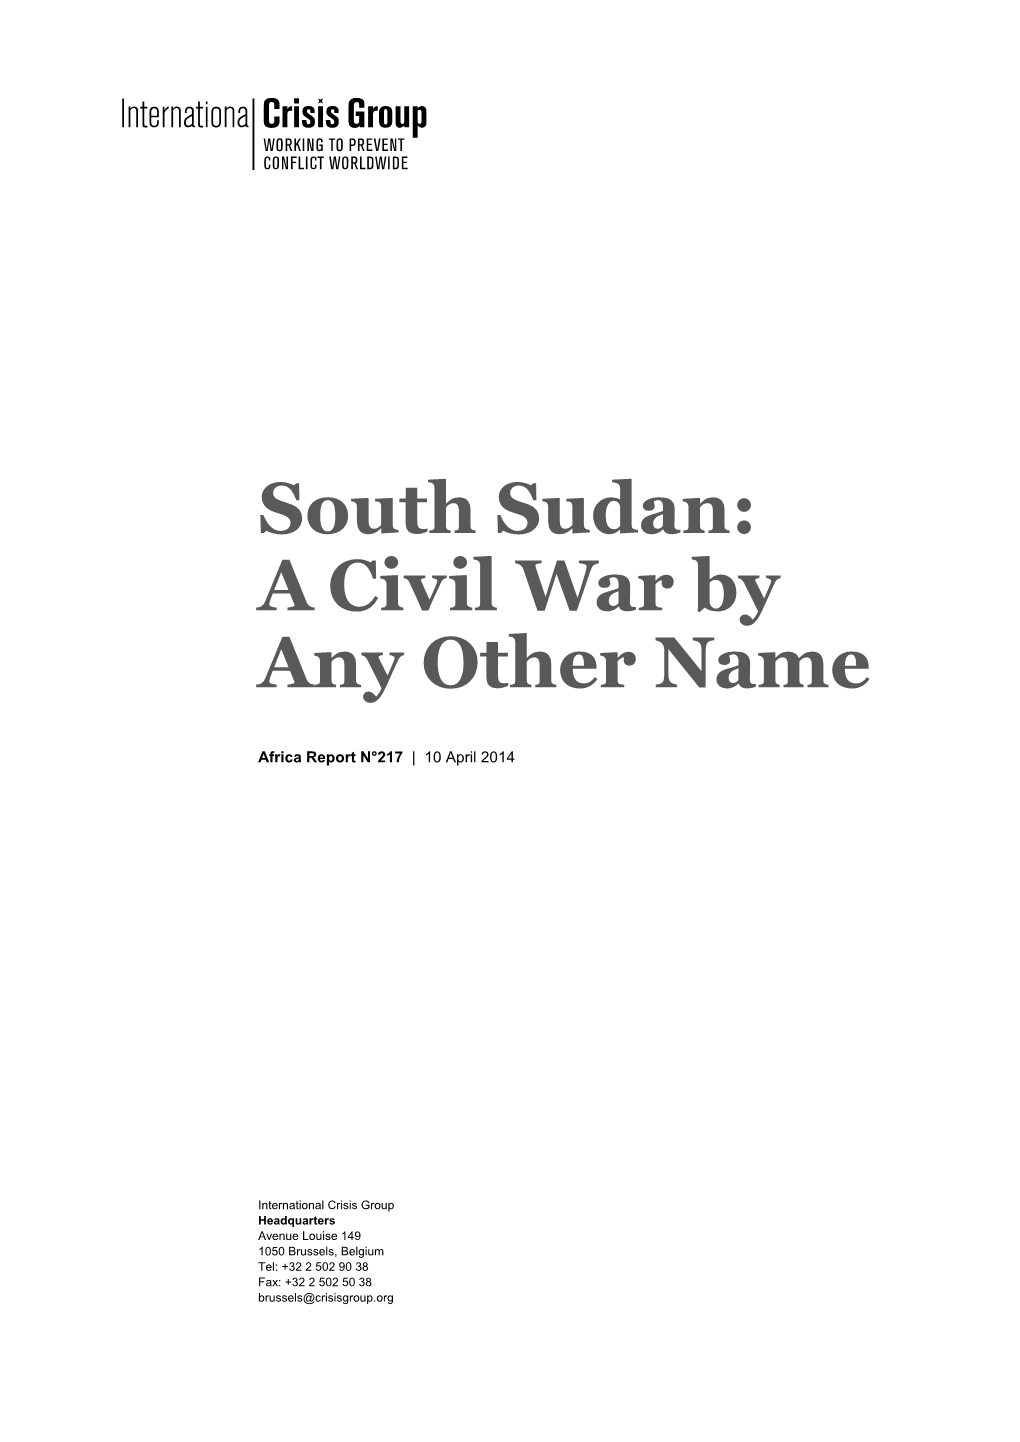 South Sudan: a Civil War by Any Other Name